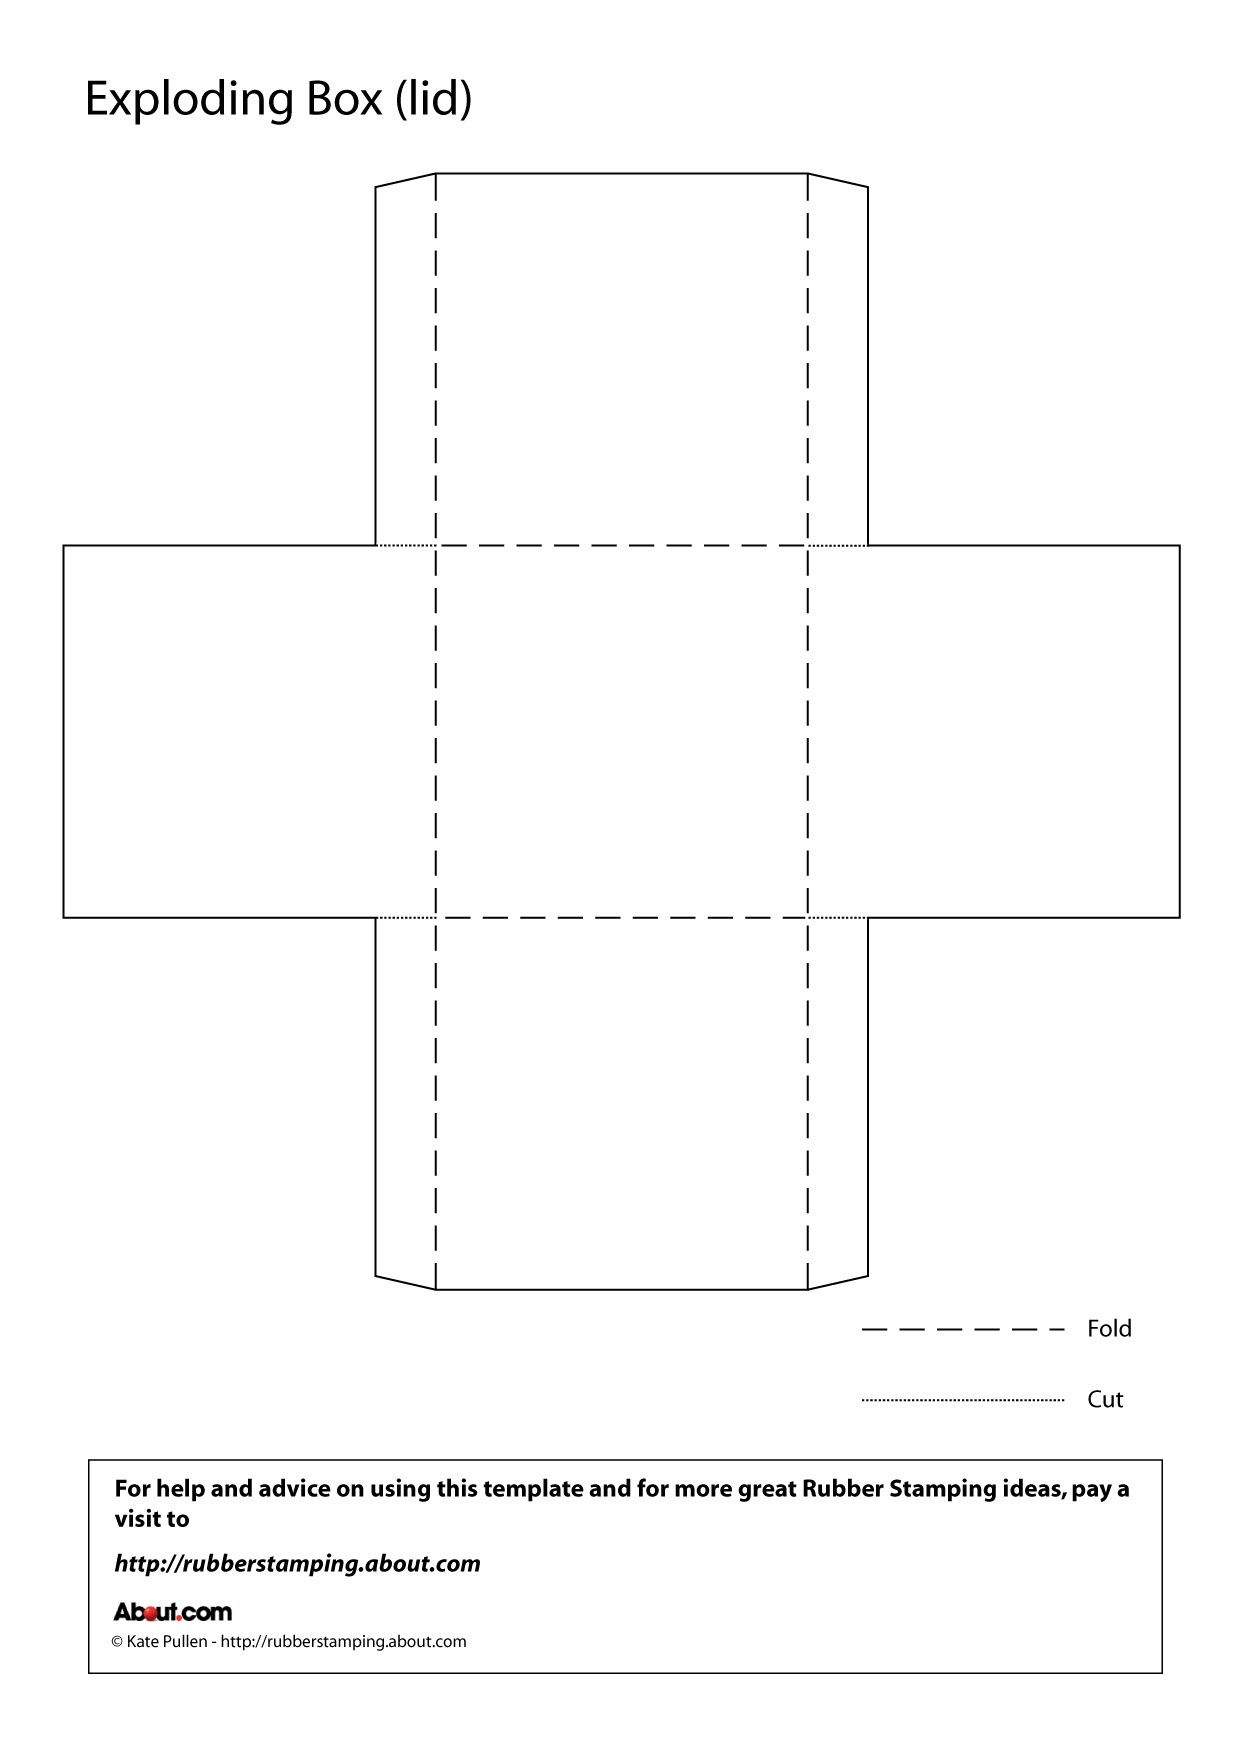 make-an-exploding-box-with-this-free-printable-template-fillable-form-2023